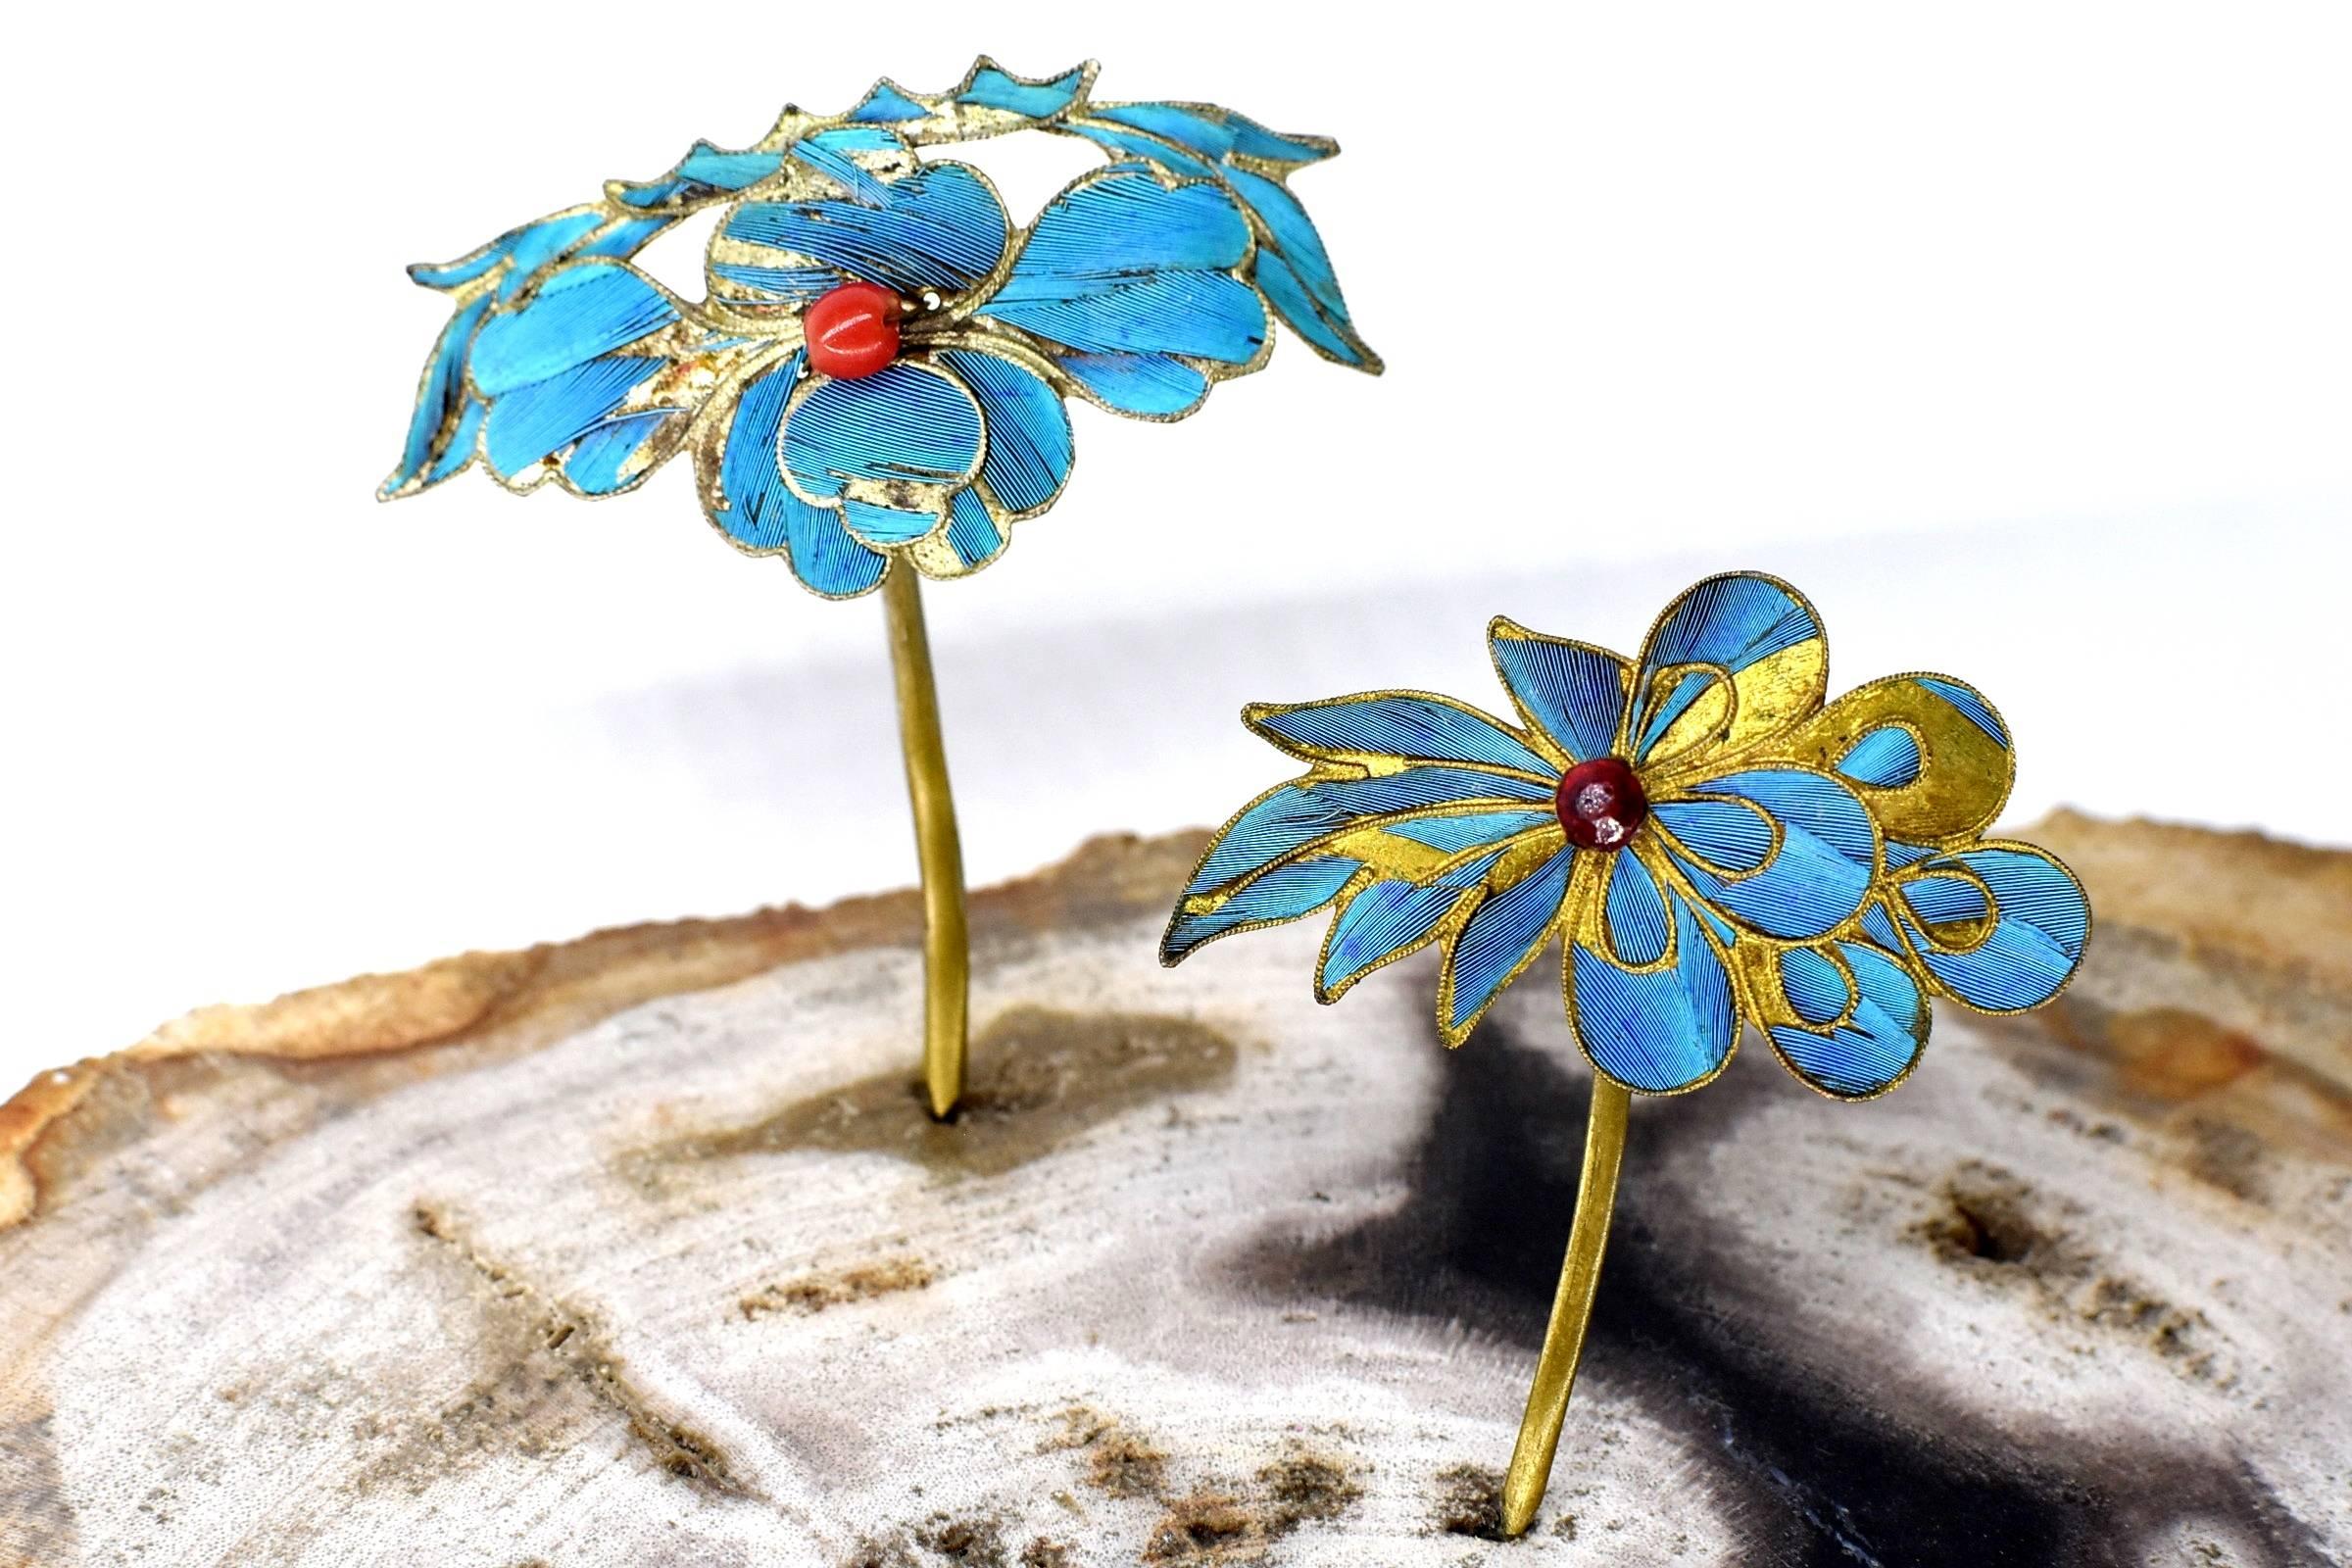 A set of two Chinese kingfisher feather hairpins.

In China's 19th century, the kingfisher feather's beautiful iridescent blue was considered a color of regality. The ladies of the elite class favored jewelries made with the kingfisher father. The